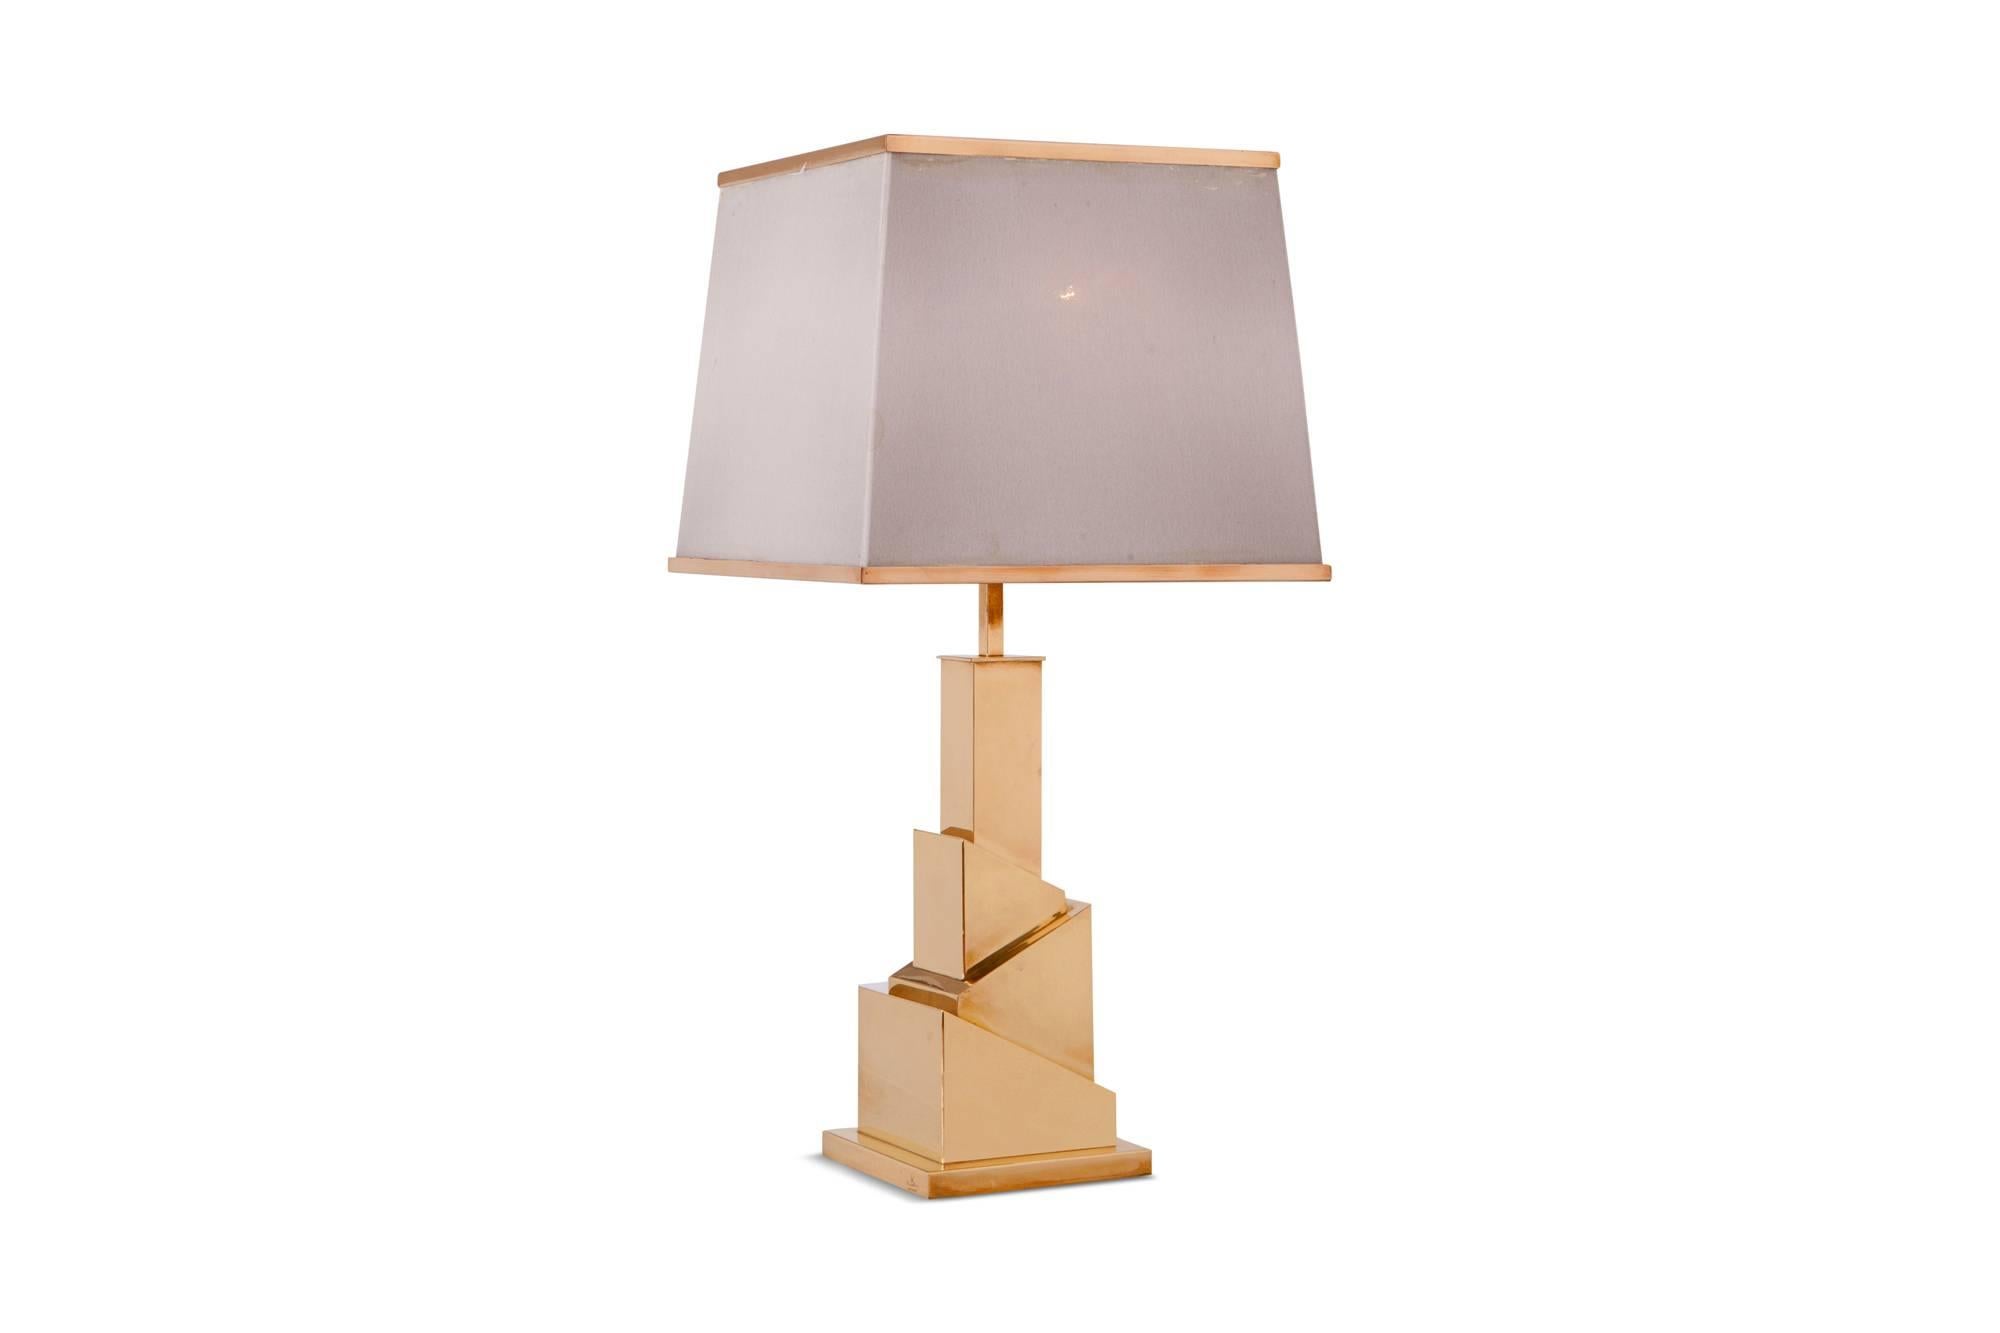 Hollywood Regency rare cubist shaped table lamp in brass by the master Romeo Rega.
The lamp is provided with two lamp fittings, covered by a crème colored linen shade to create a nice light partition. The shade is also finished with brass